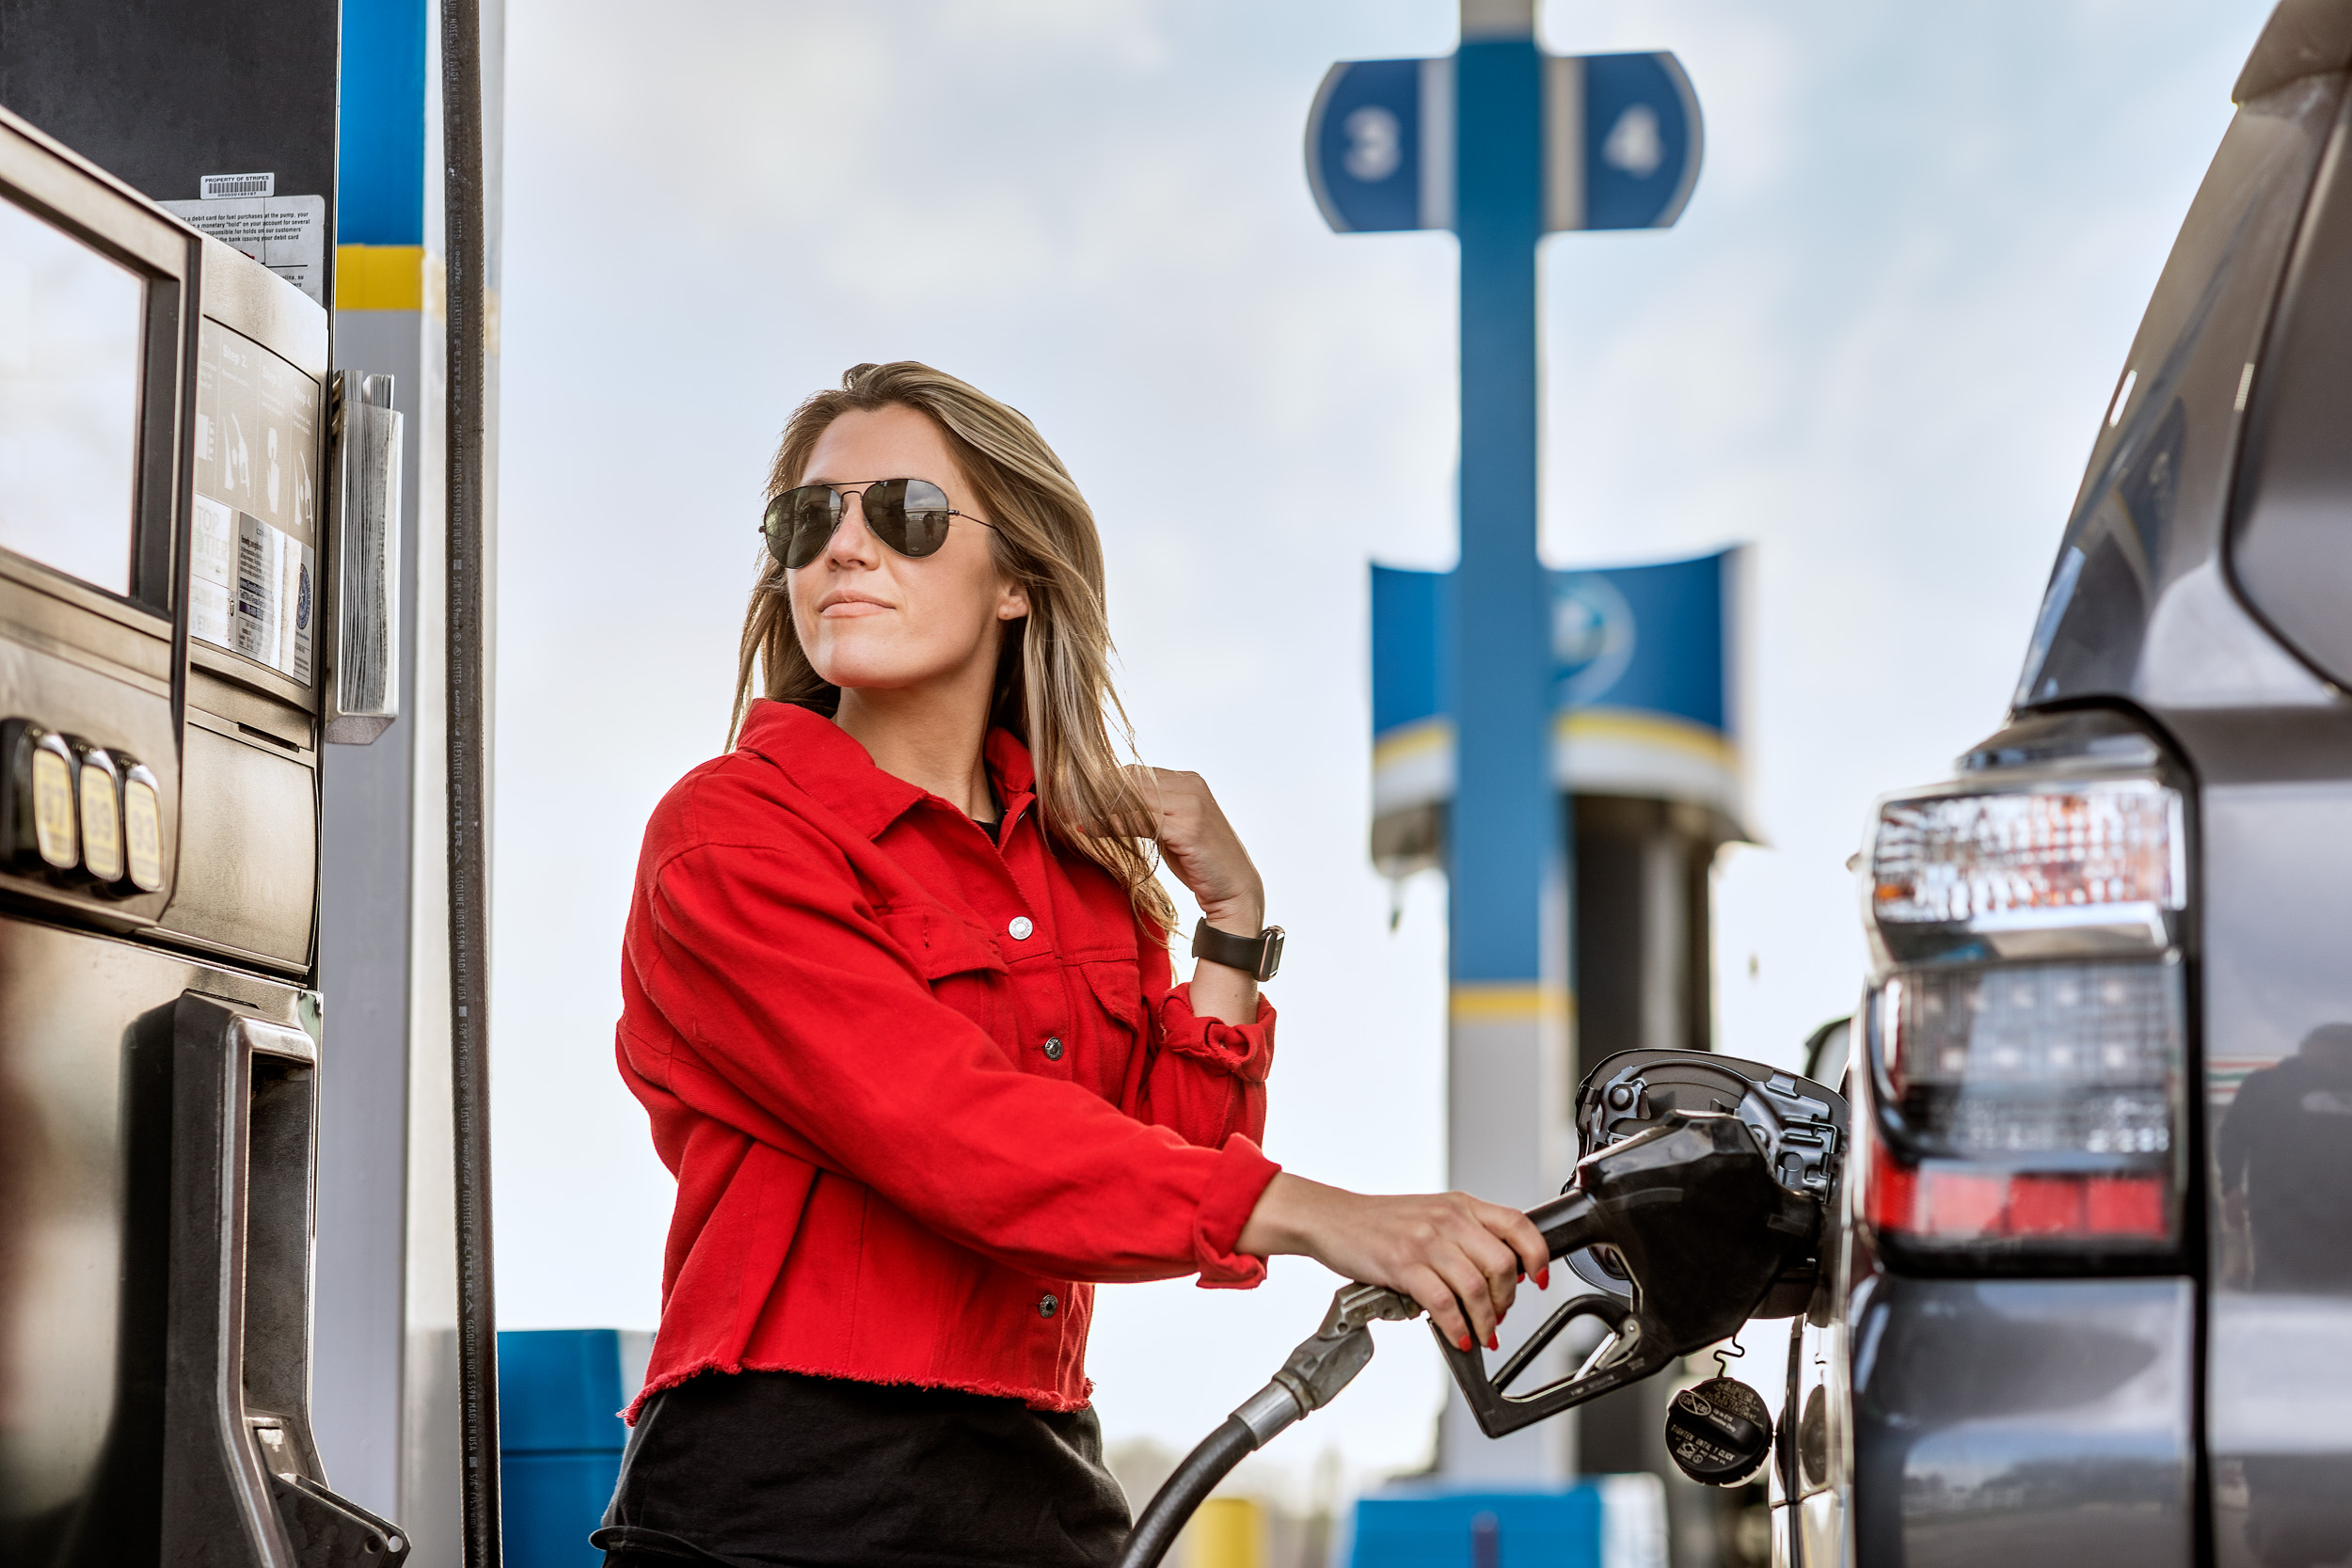 woman wearing red top pumping gas at valero gas station